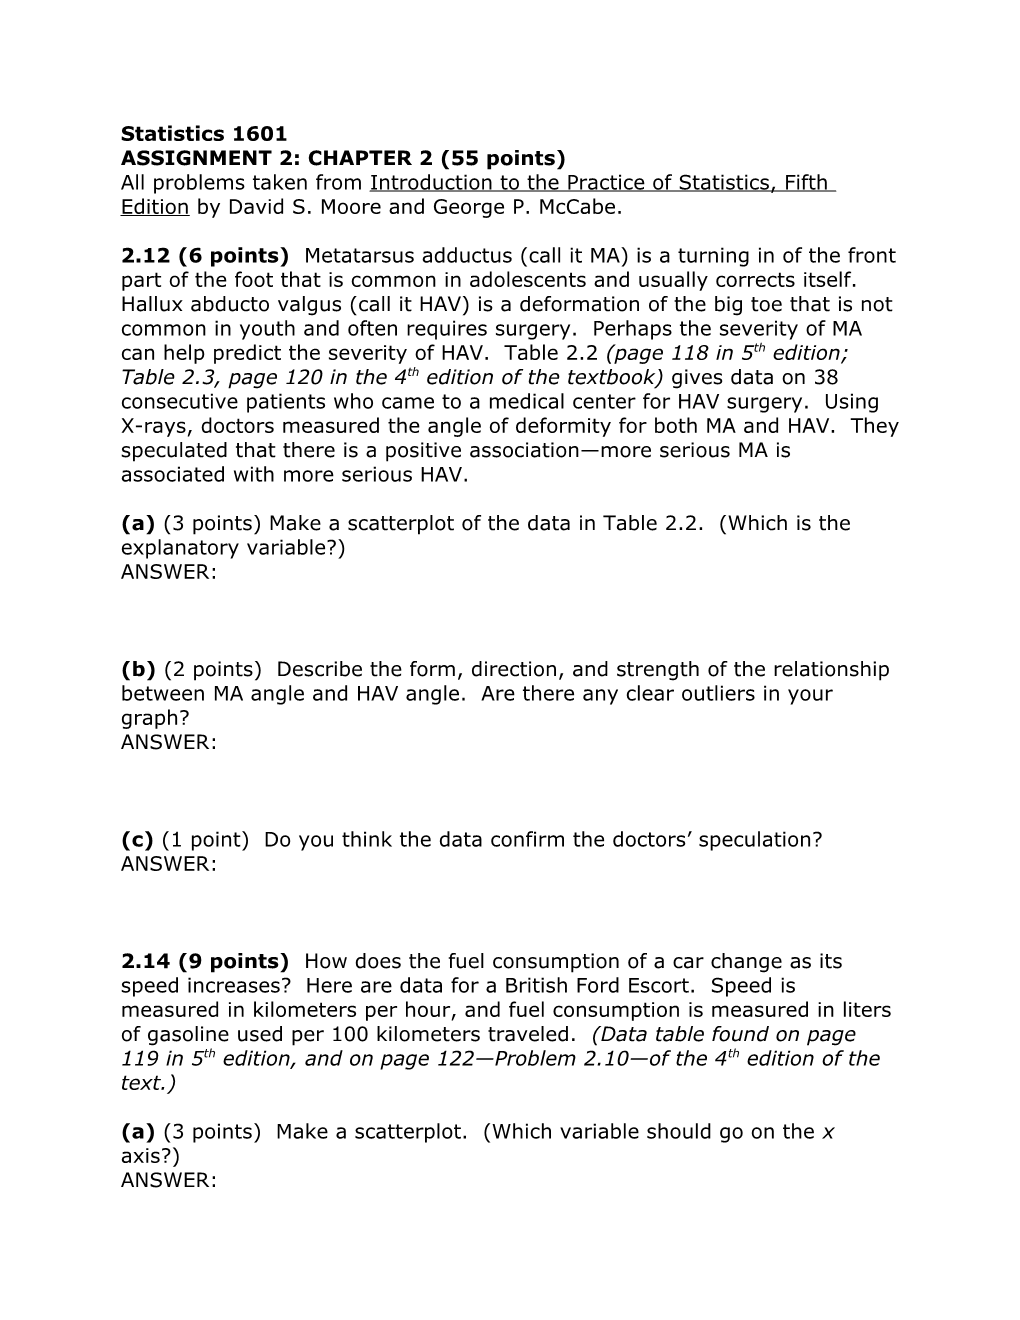 ASSIGNMENT 2: CHAPTER 2 (55 Points)